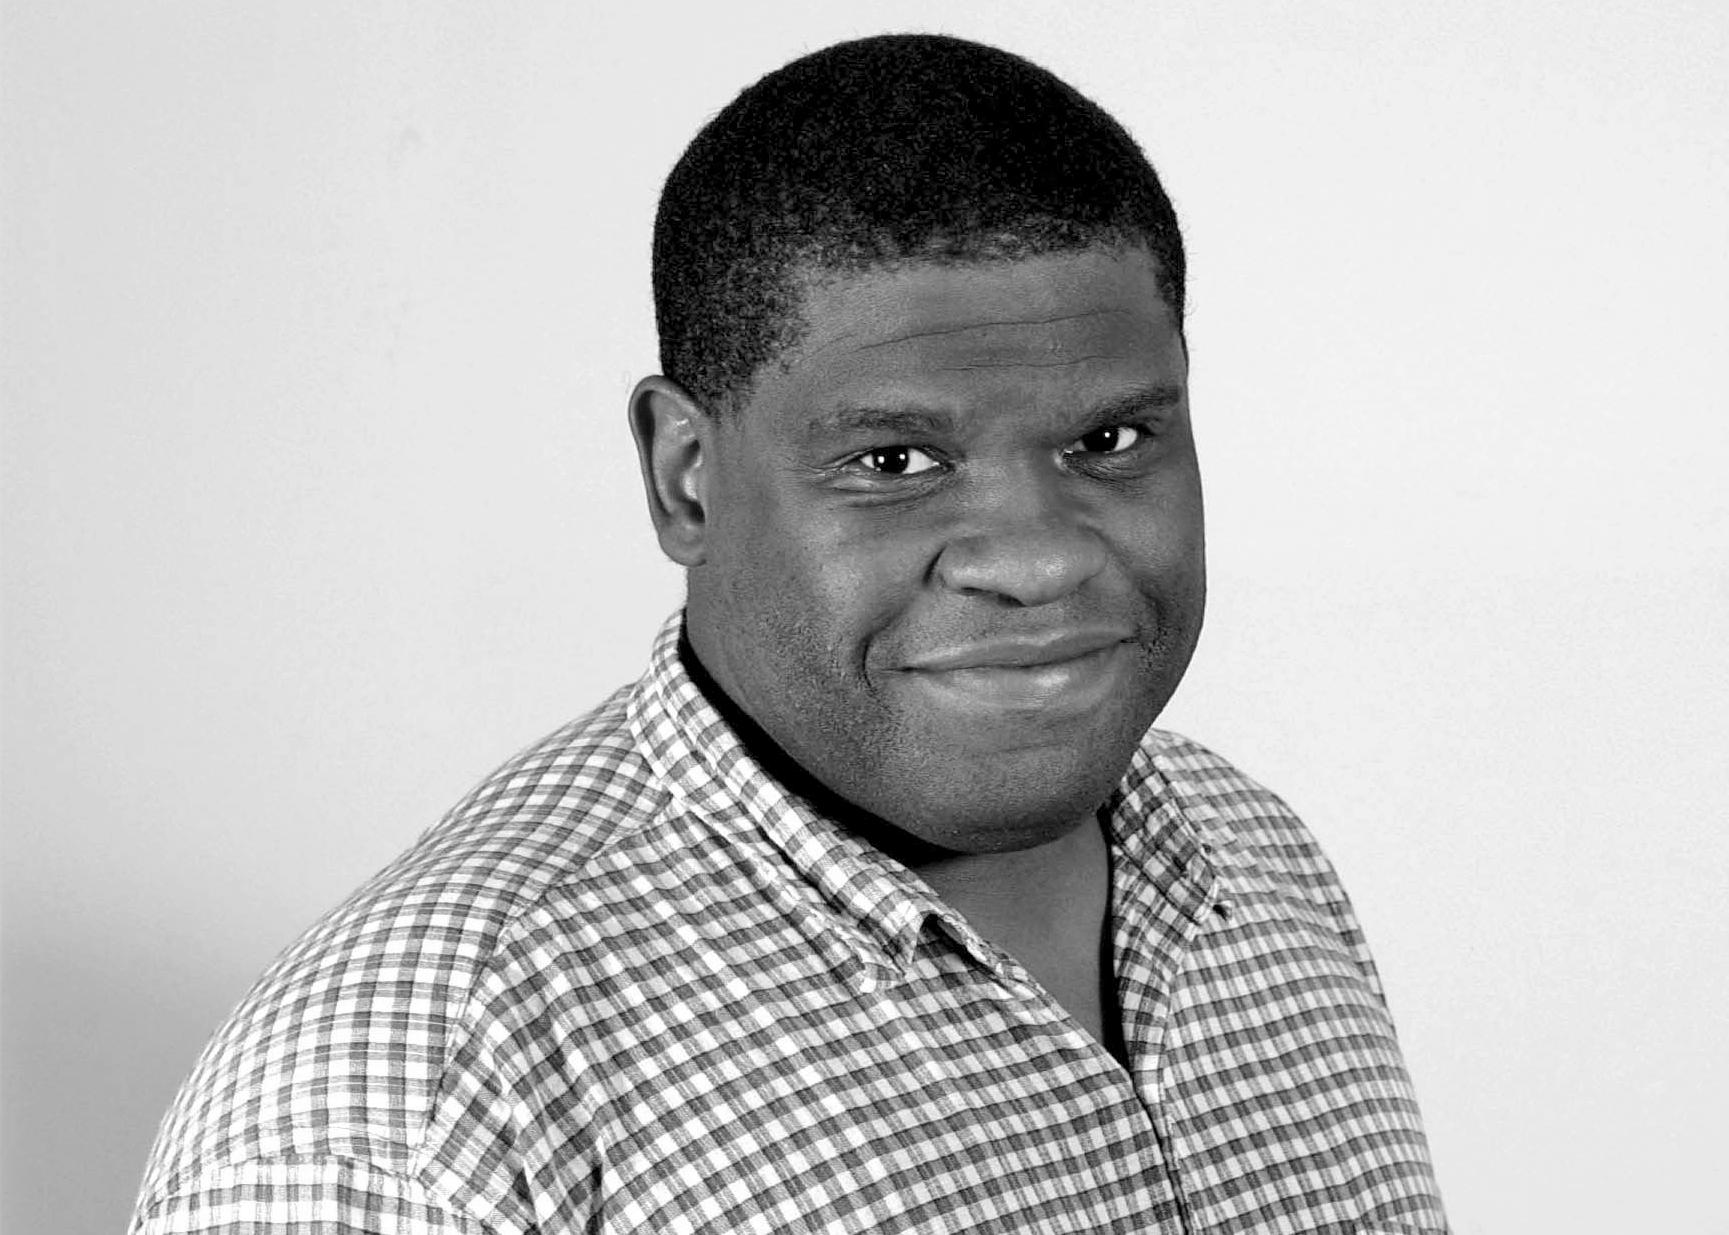 Gary Younge's new book is called A Day in the Death of America.